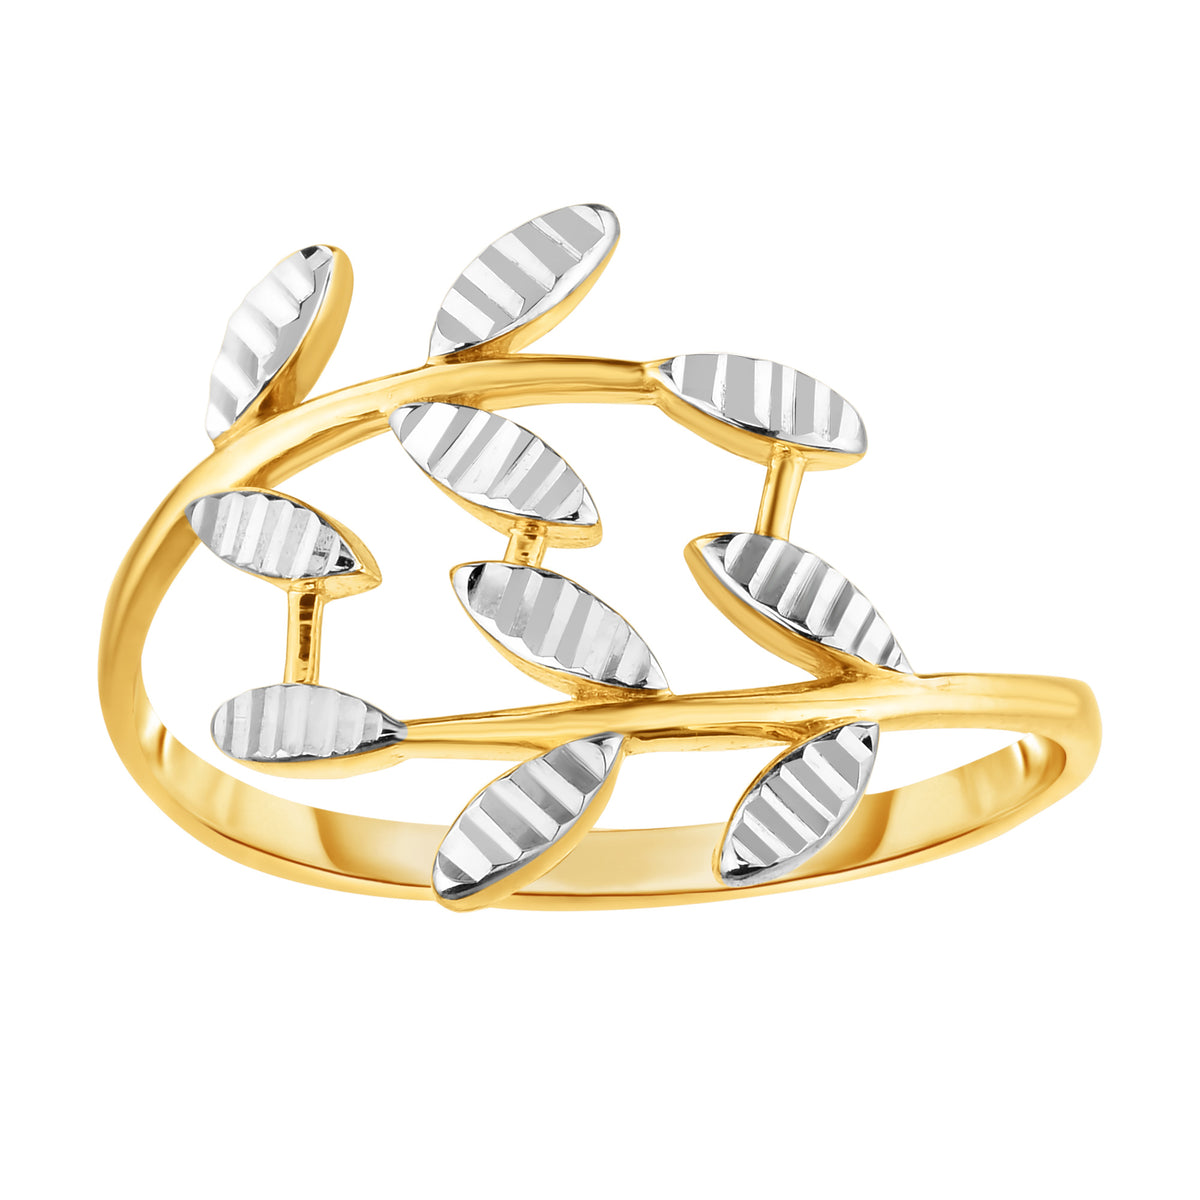 14K Two Tone Gold Diamond Cut Olive Leaf Branch Design Ring, Size 7 fine designer jewelry for men and women